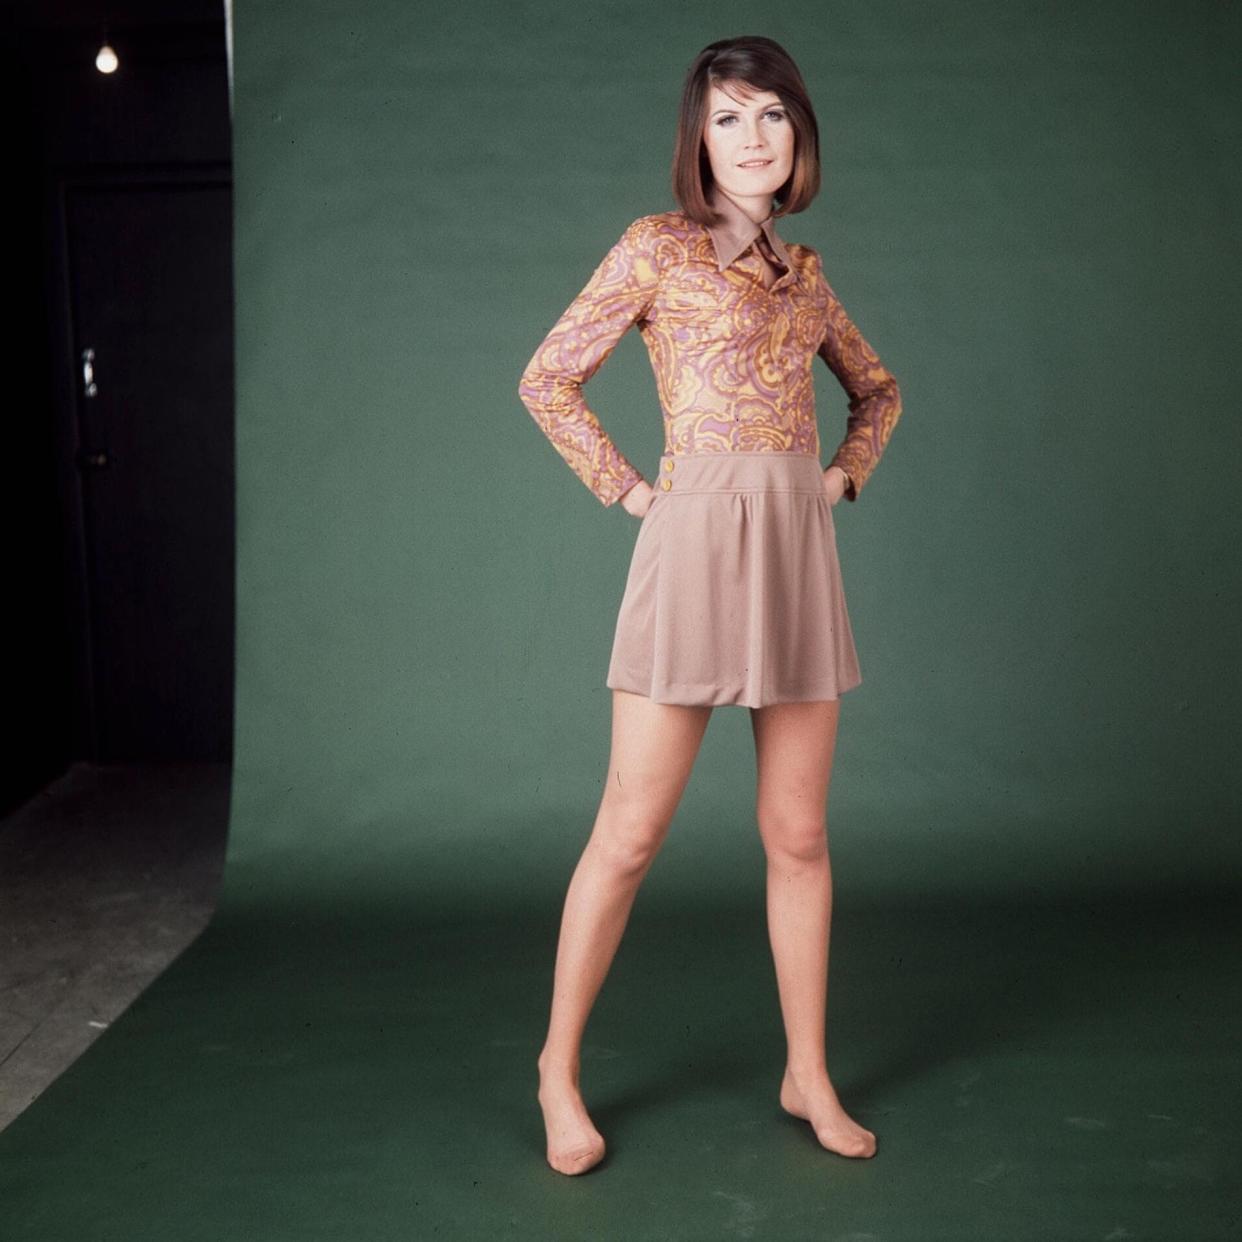 No strings attached: Sandie Shaw in 1967